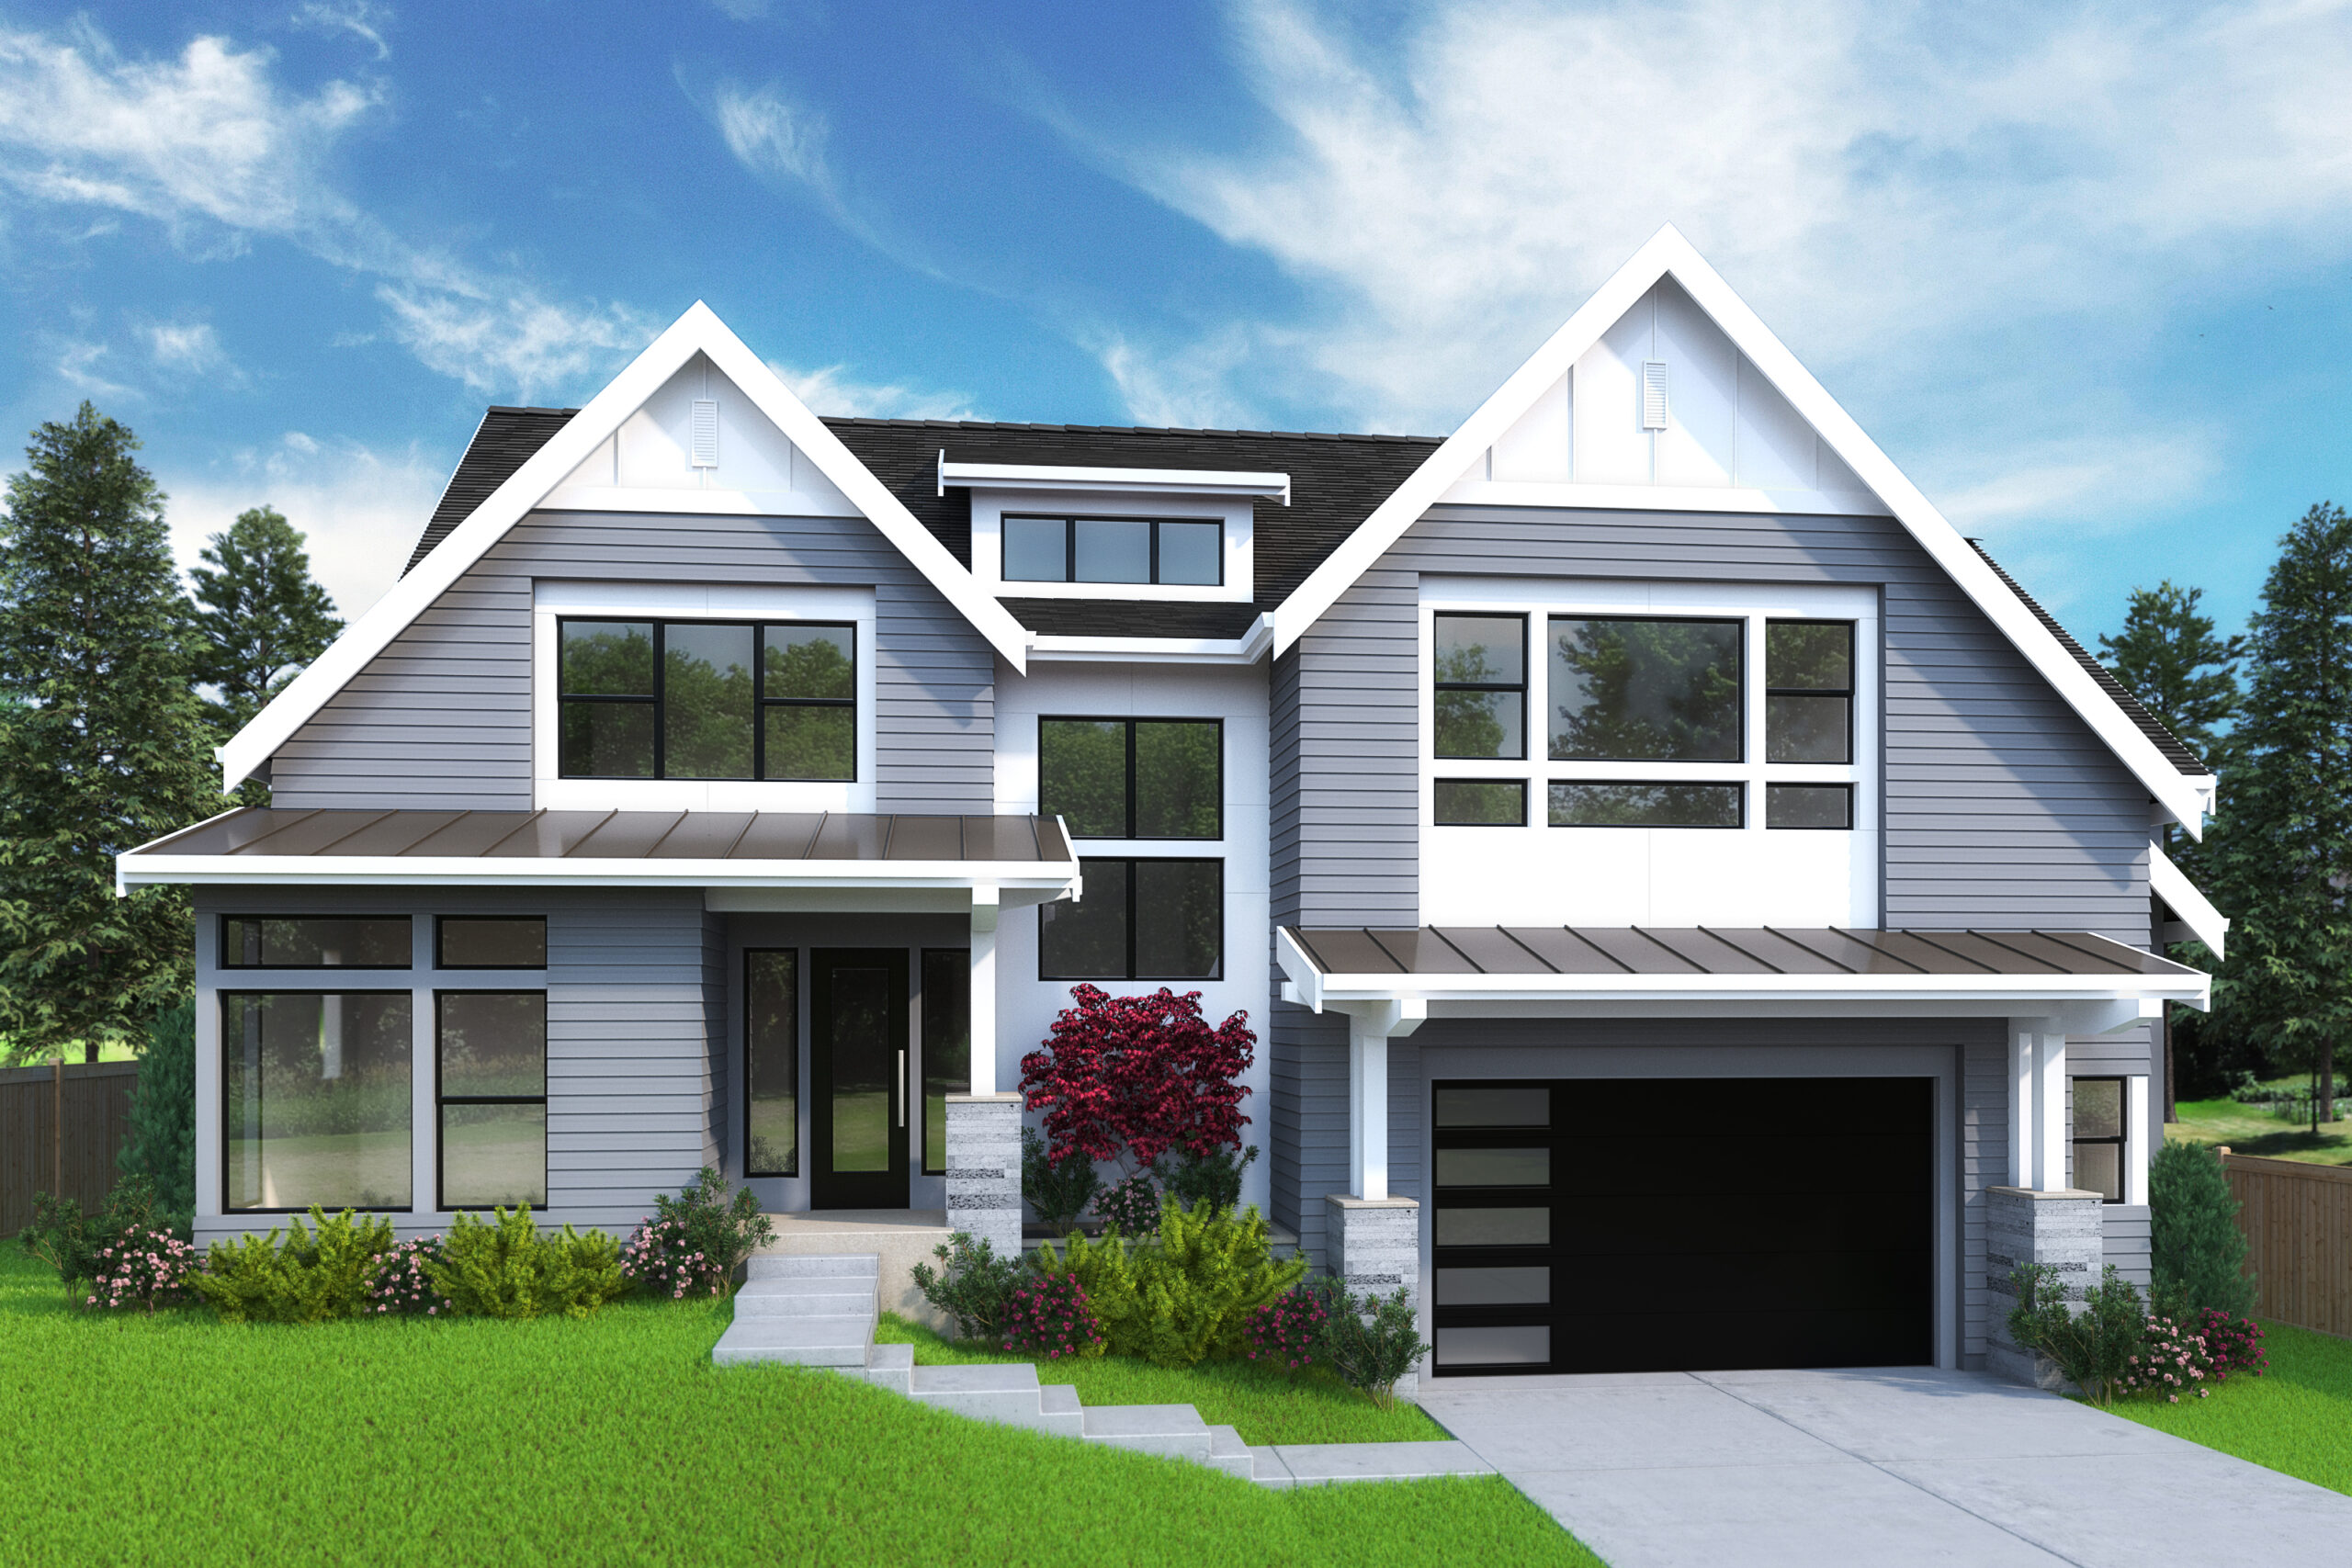 View our new luxury home construction on 4135 154th Ave SE, in Bellevue, WA from MN Custom Homes